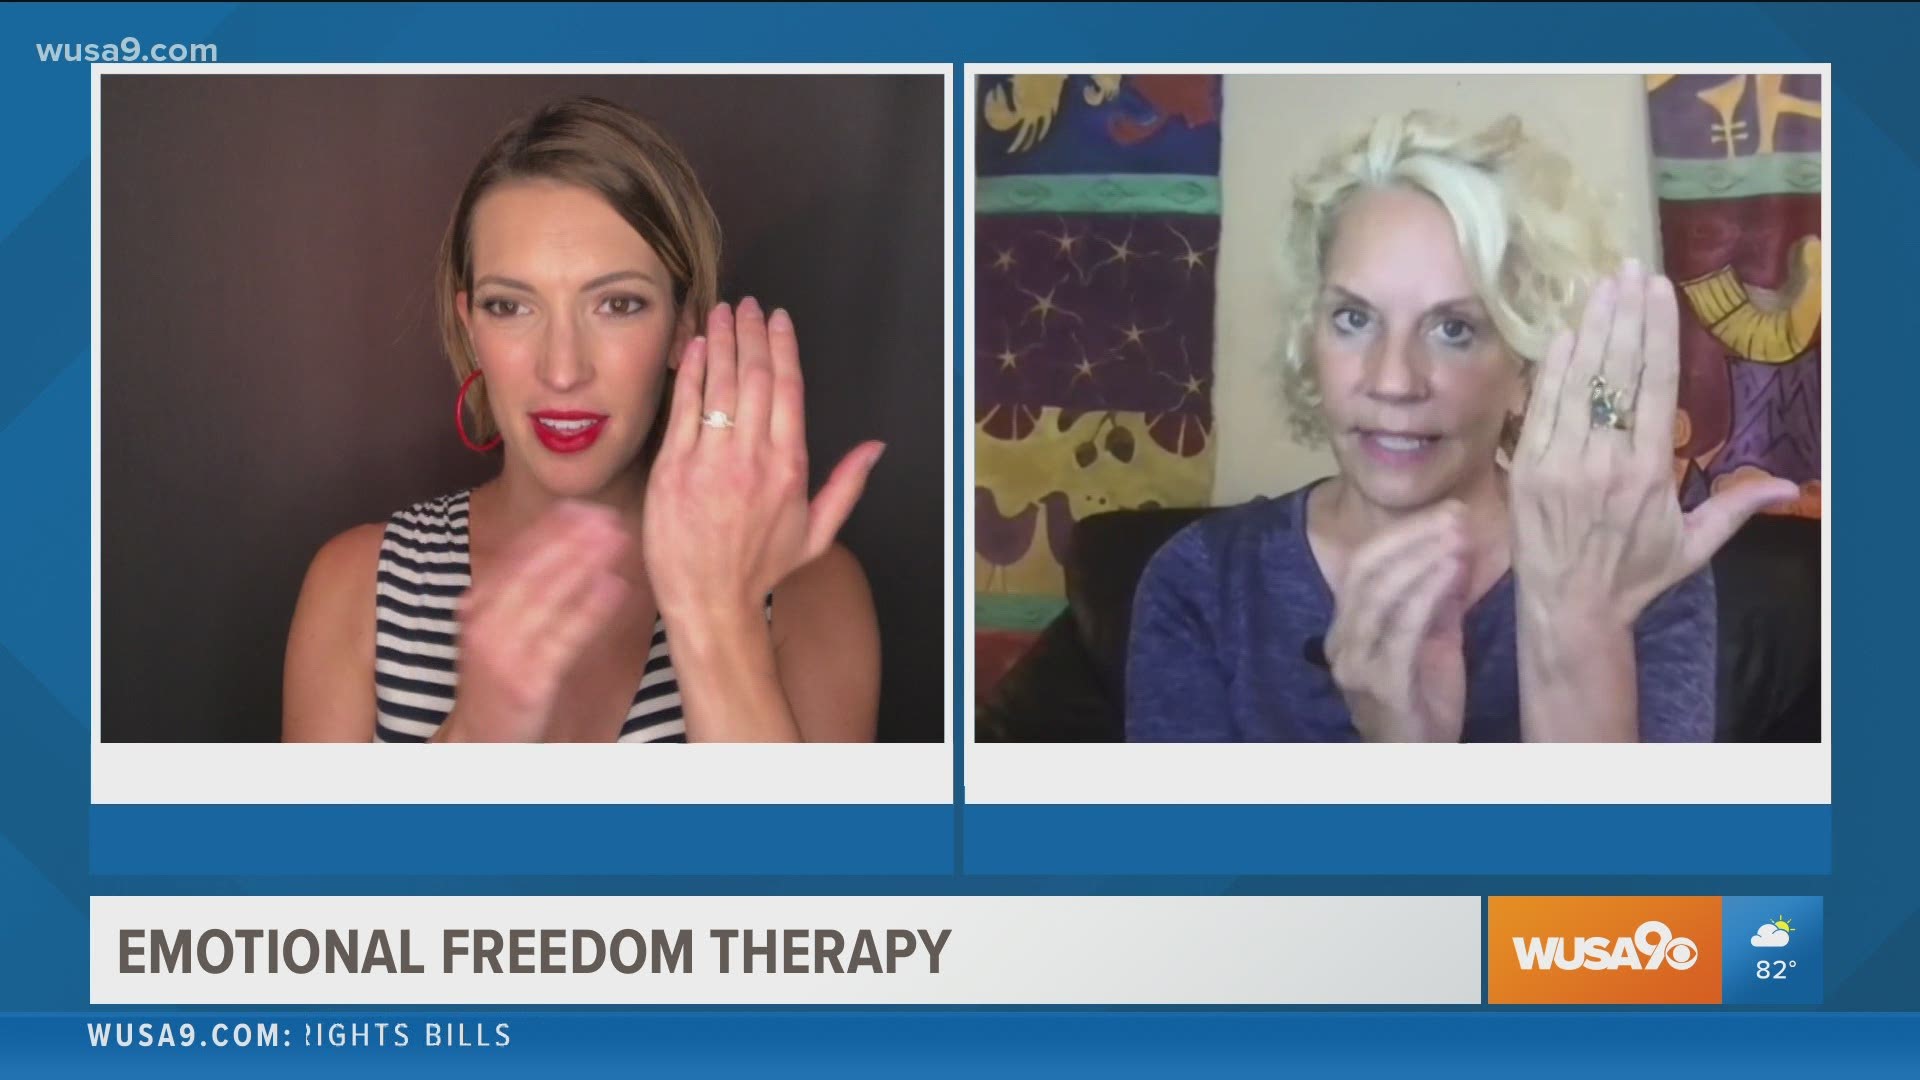 Cyndi Dale, master energy healer and author of 28 books on healing, spirituality, and intuition share tips on EFT (emotional freedom therapy).